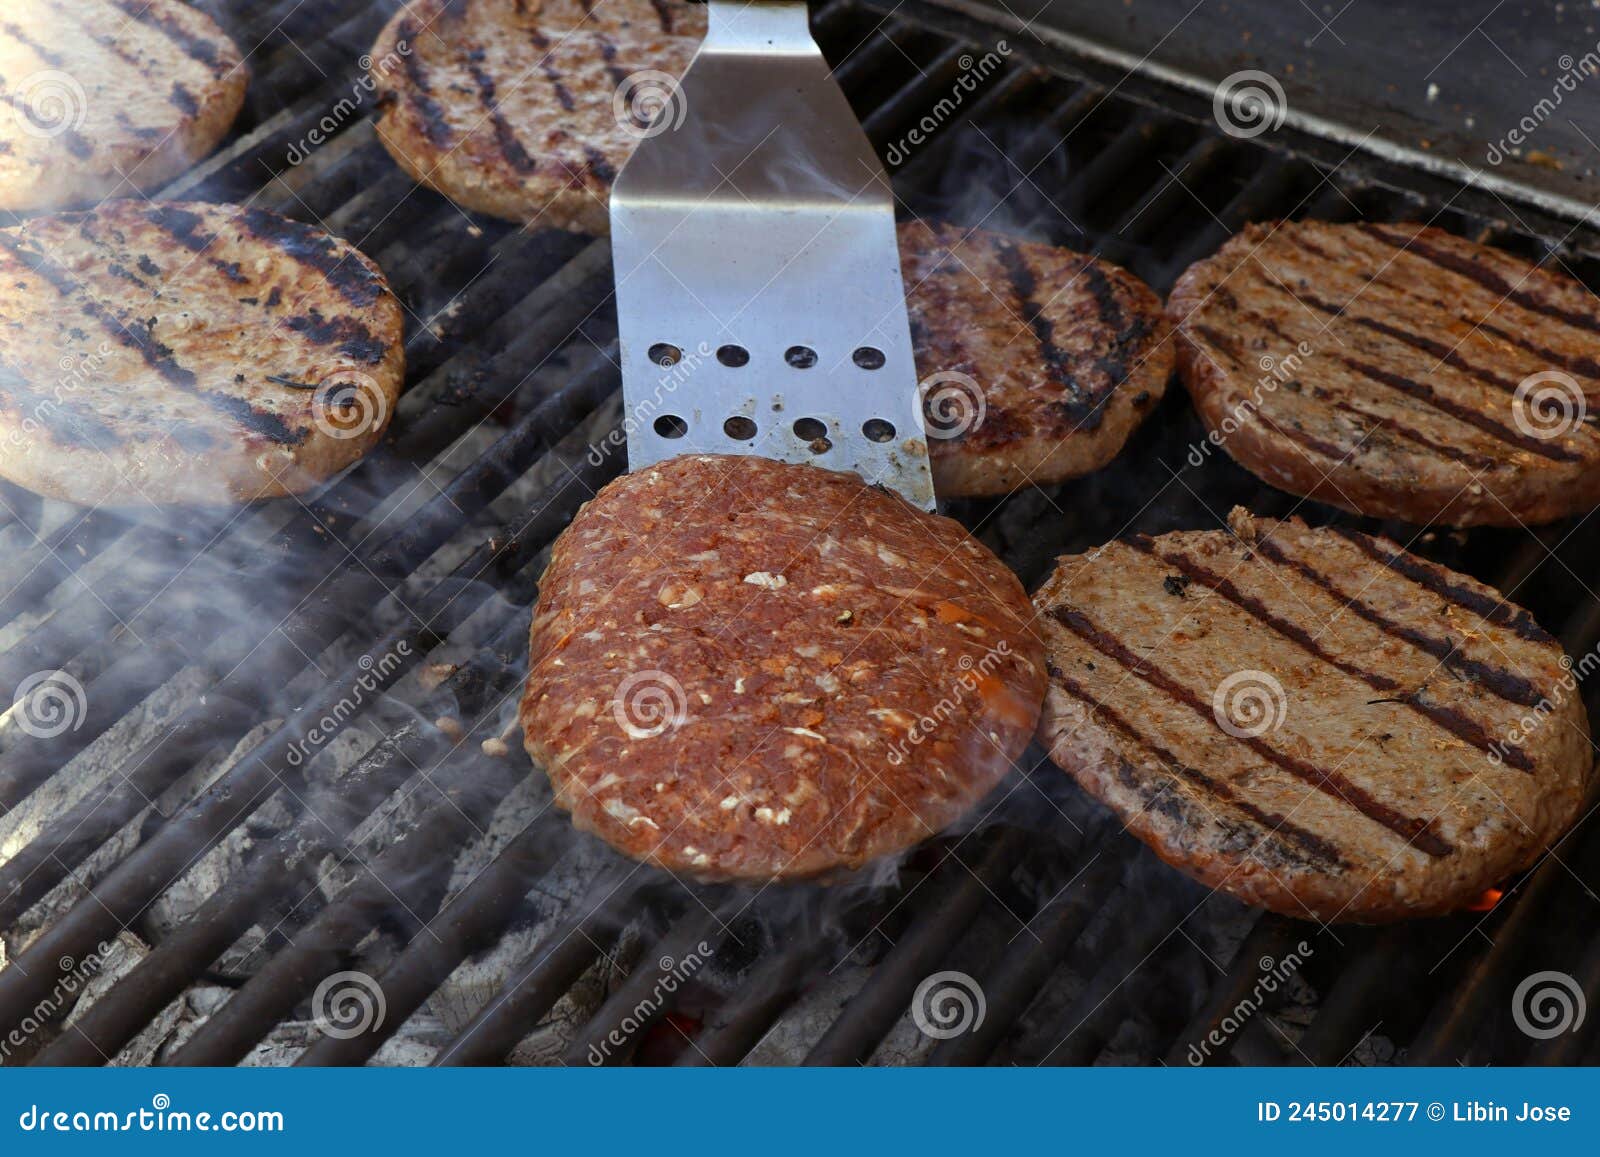 Beef Meat Burger Patty on a Hot Smoky Barbeque Grill Stock Image ...